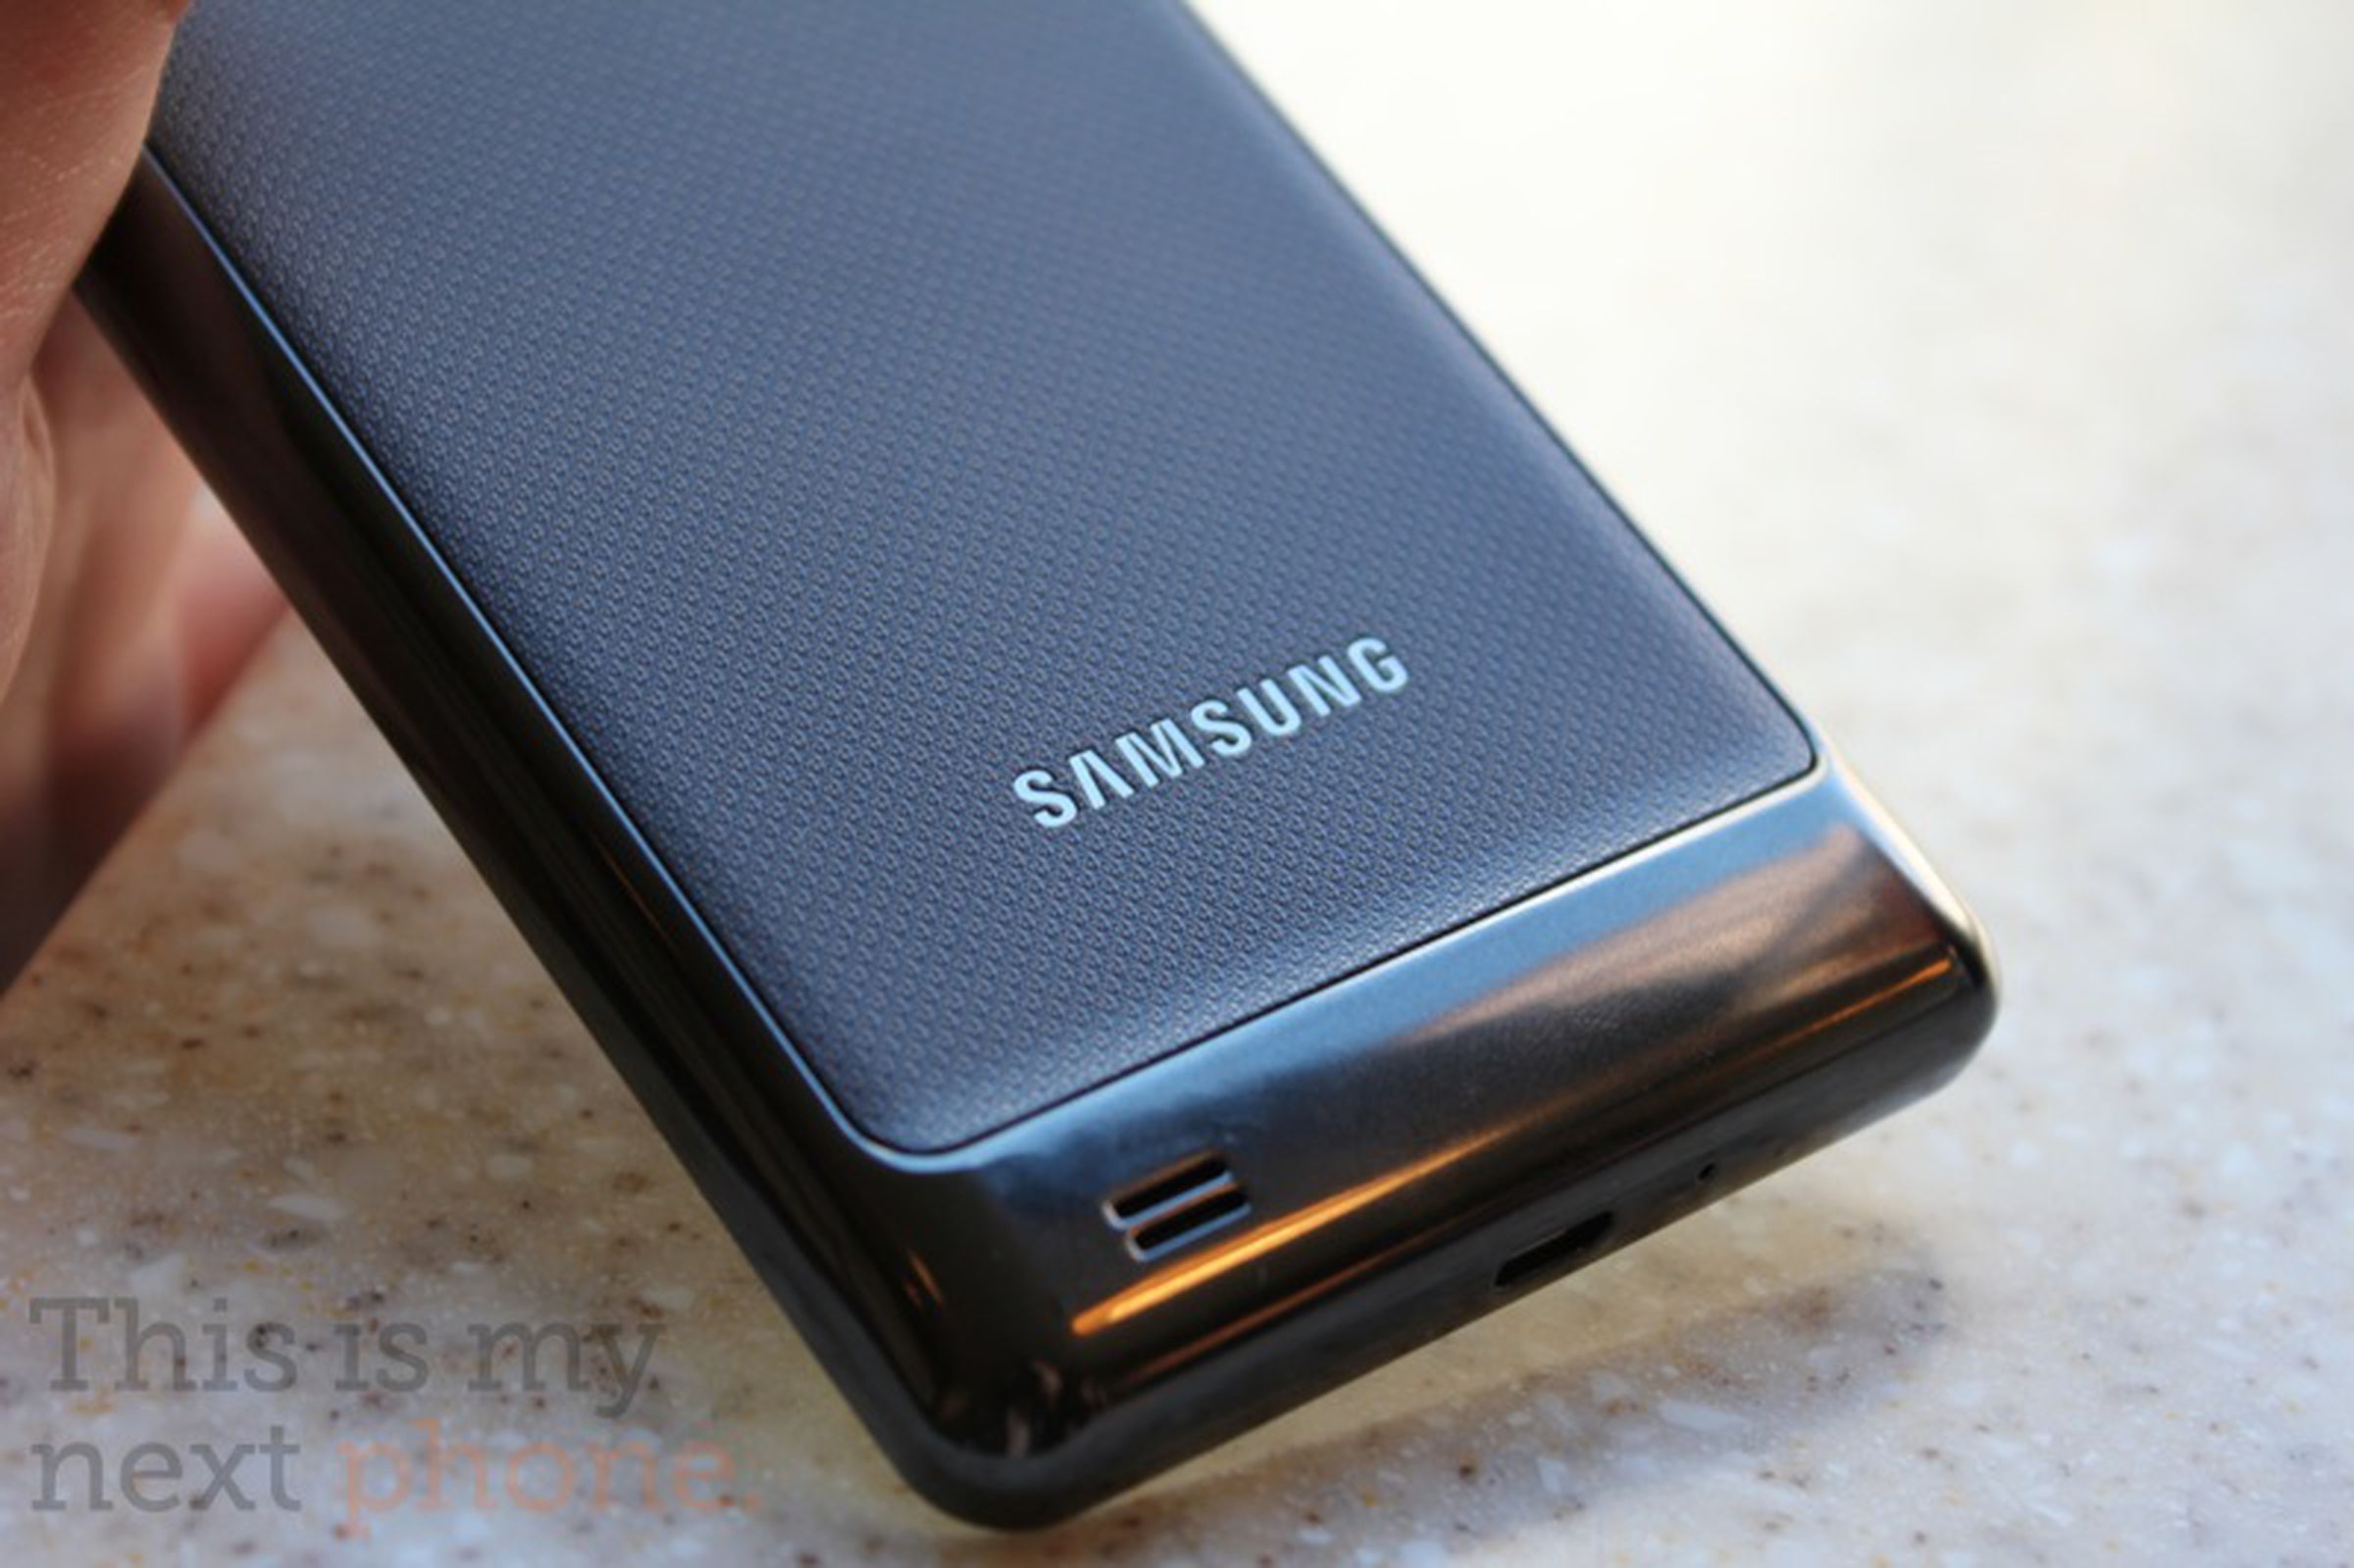 Samsung Infuse 4G for AT&T: comparison with Galaxy S II